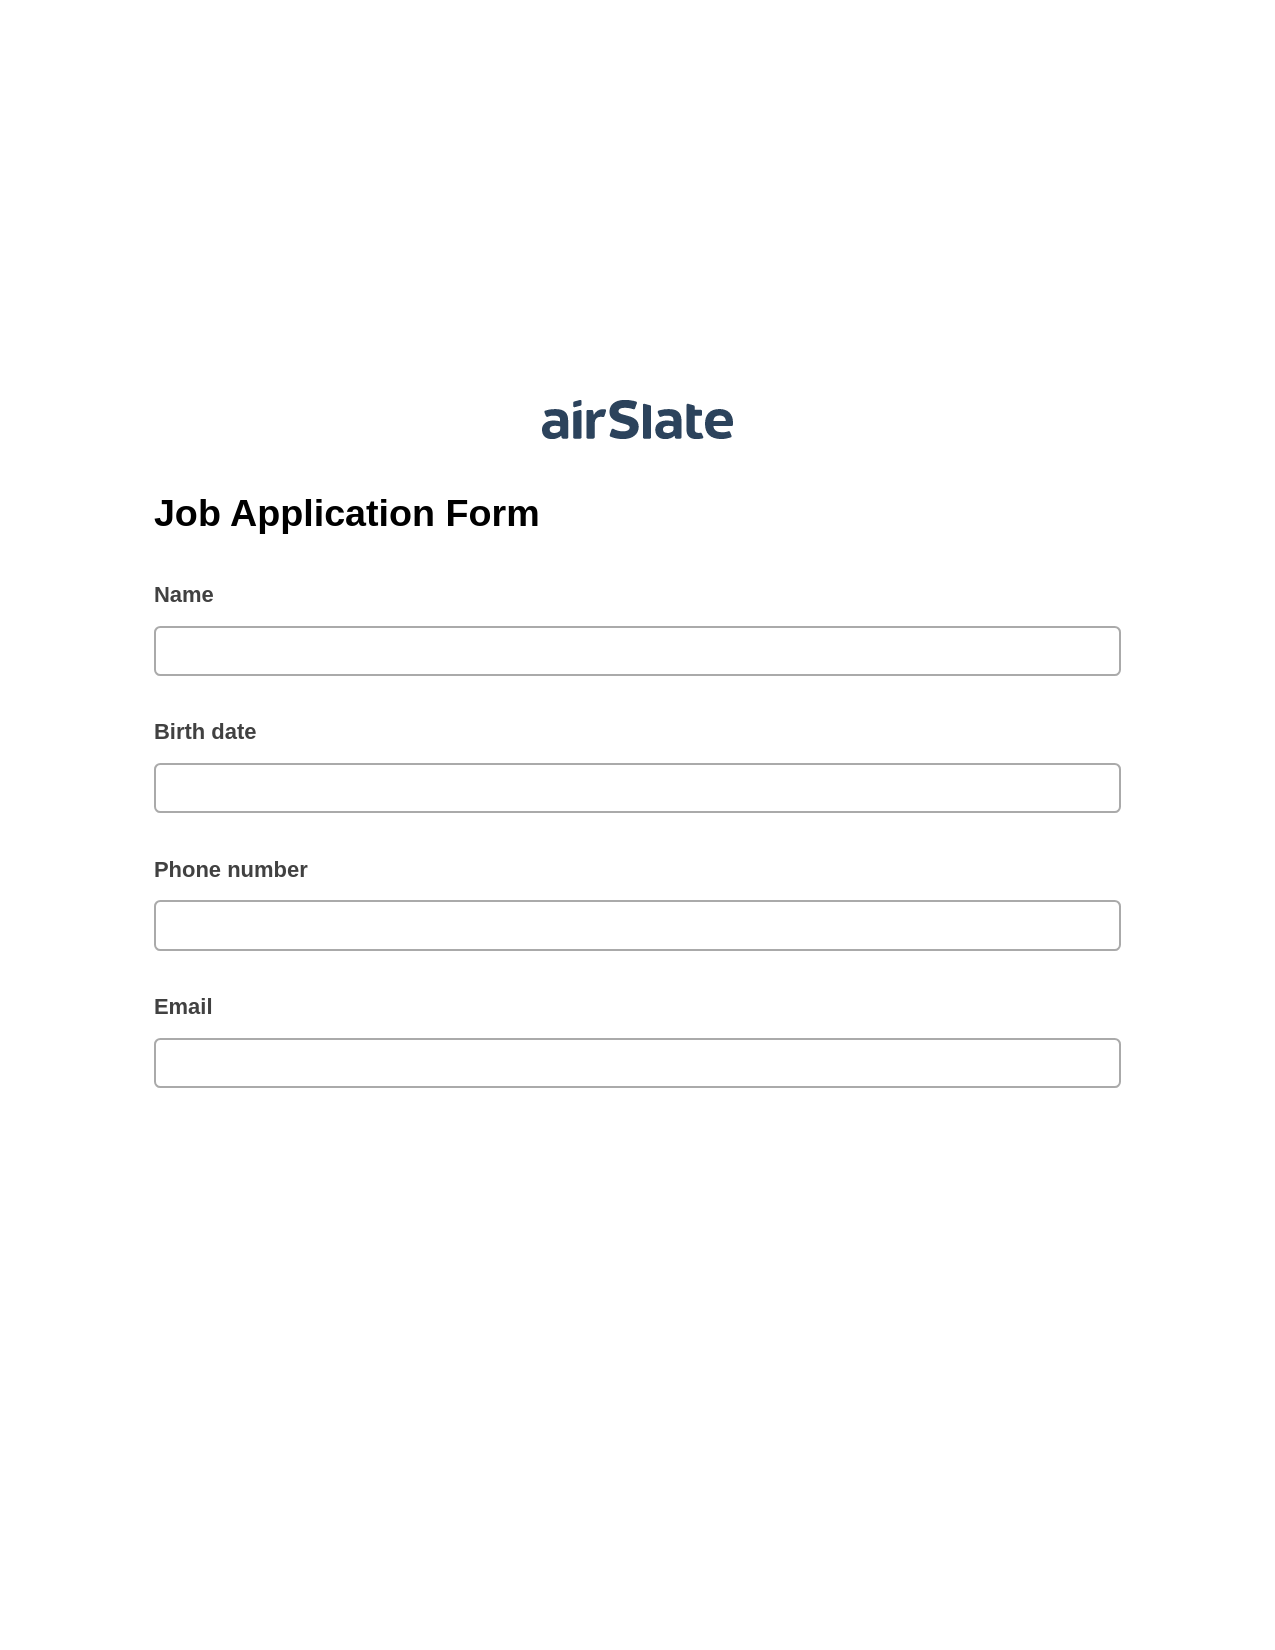 Multirole Job Application Form Pre-fill Dropdowns from Smartsheet Bot, Audit Trail Bot, Export to Excel 365 Bot